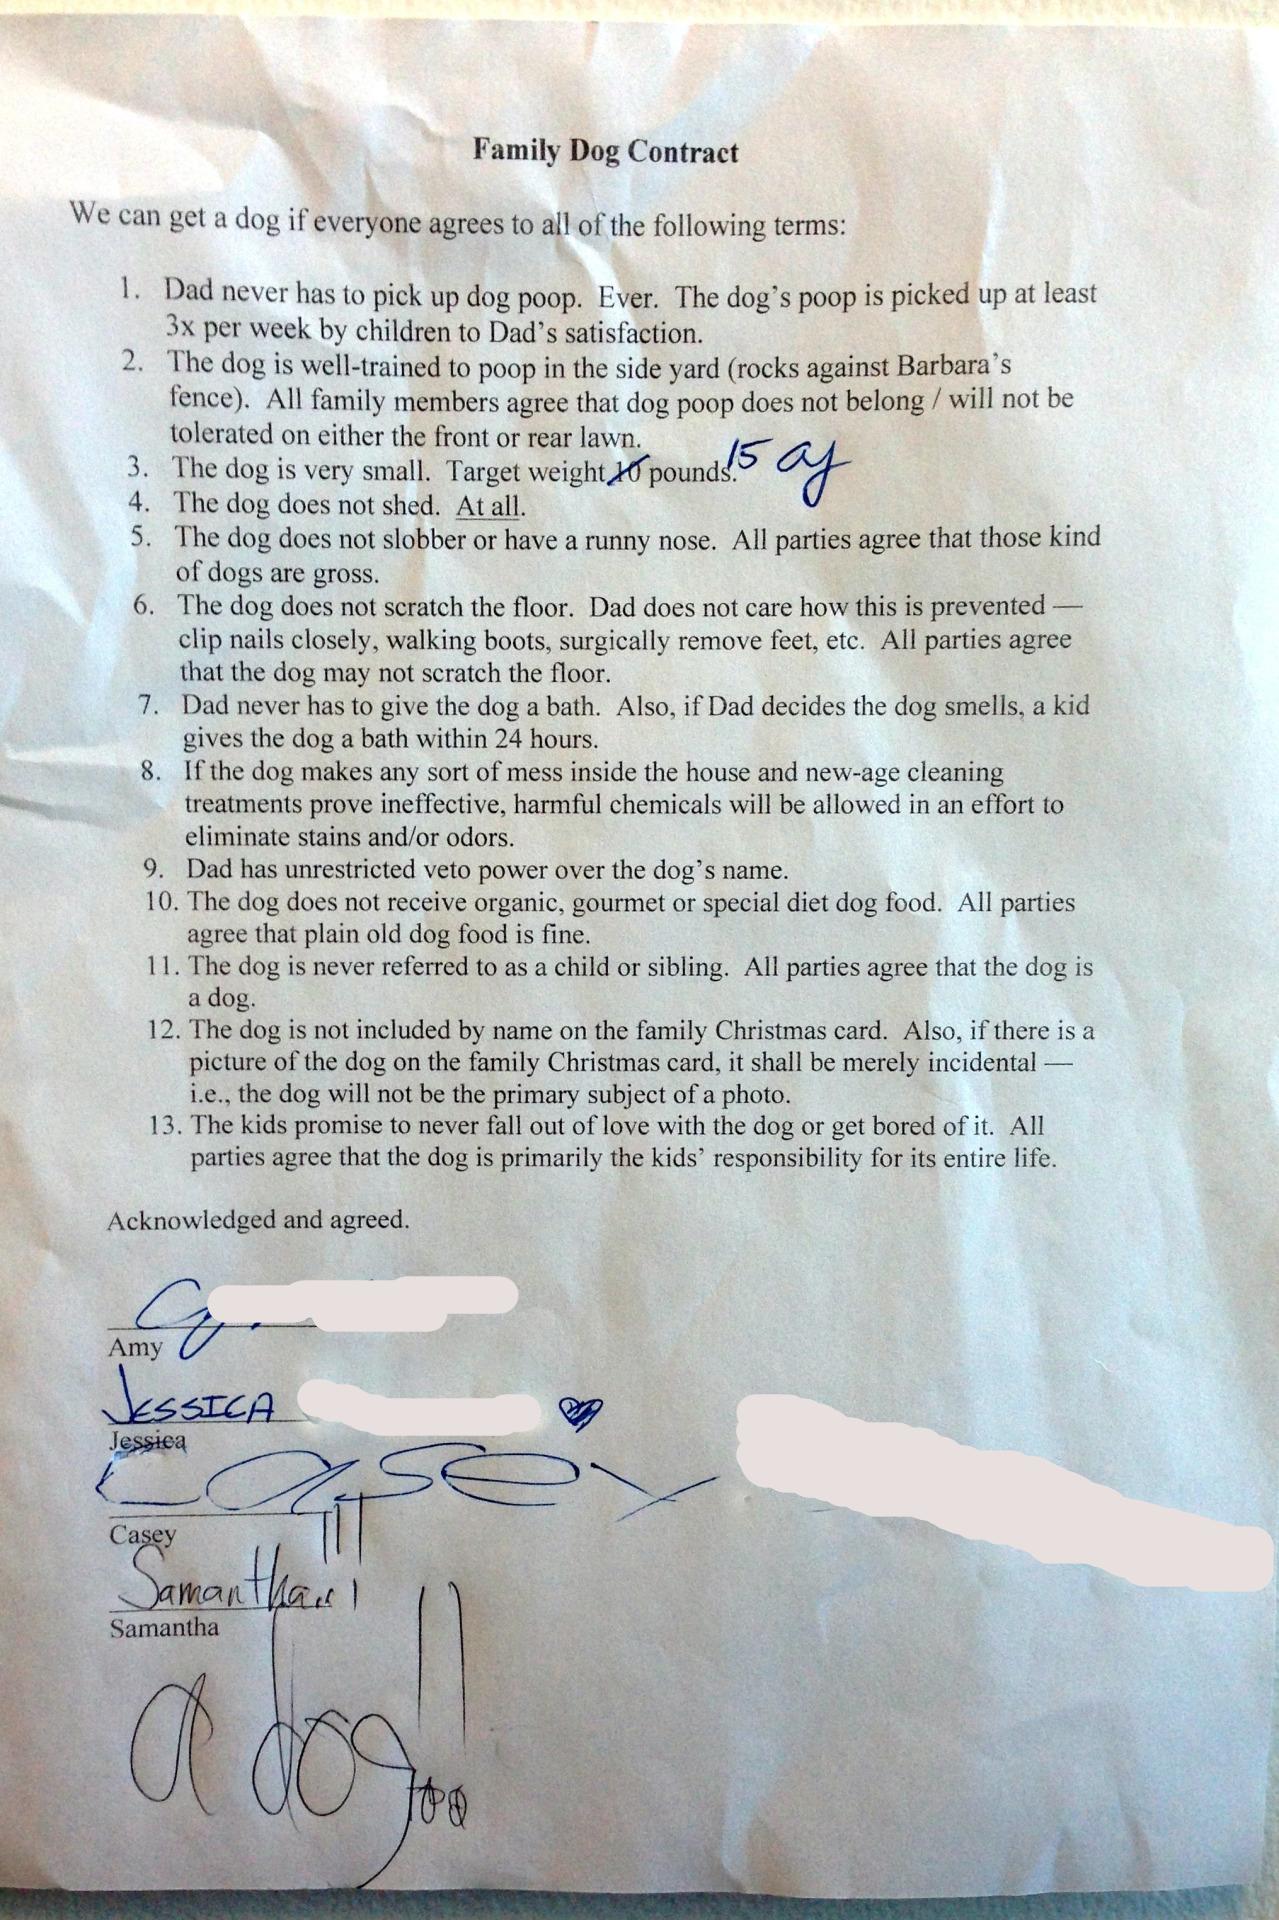 family dog contract drafted by reluctant dad - Imgur